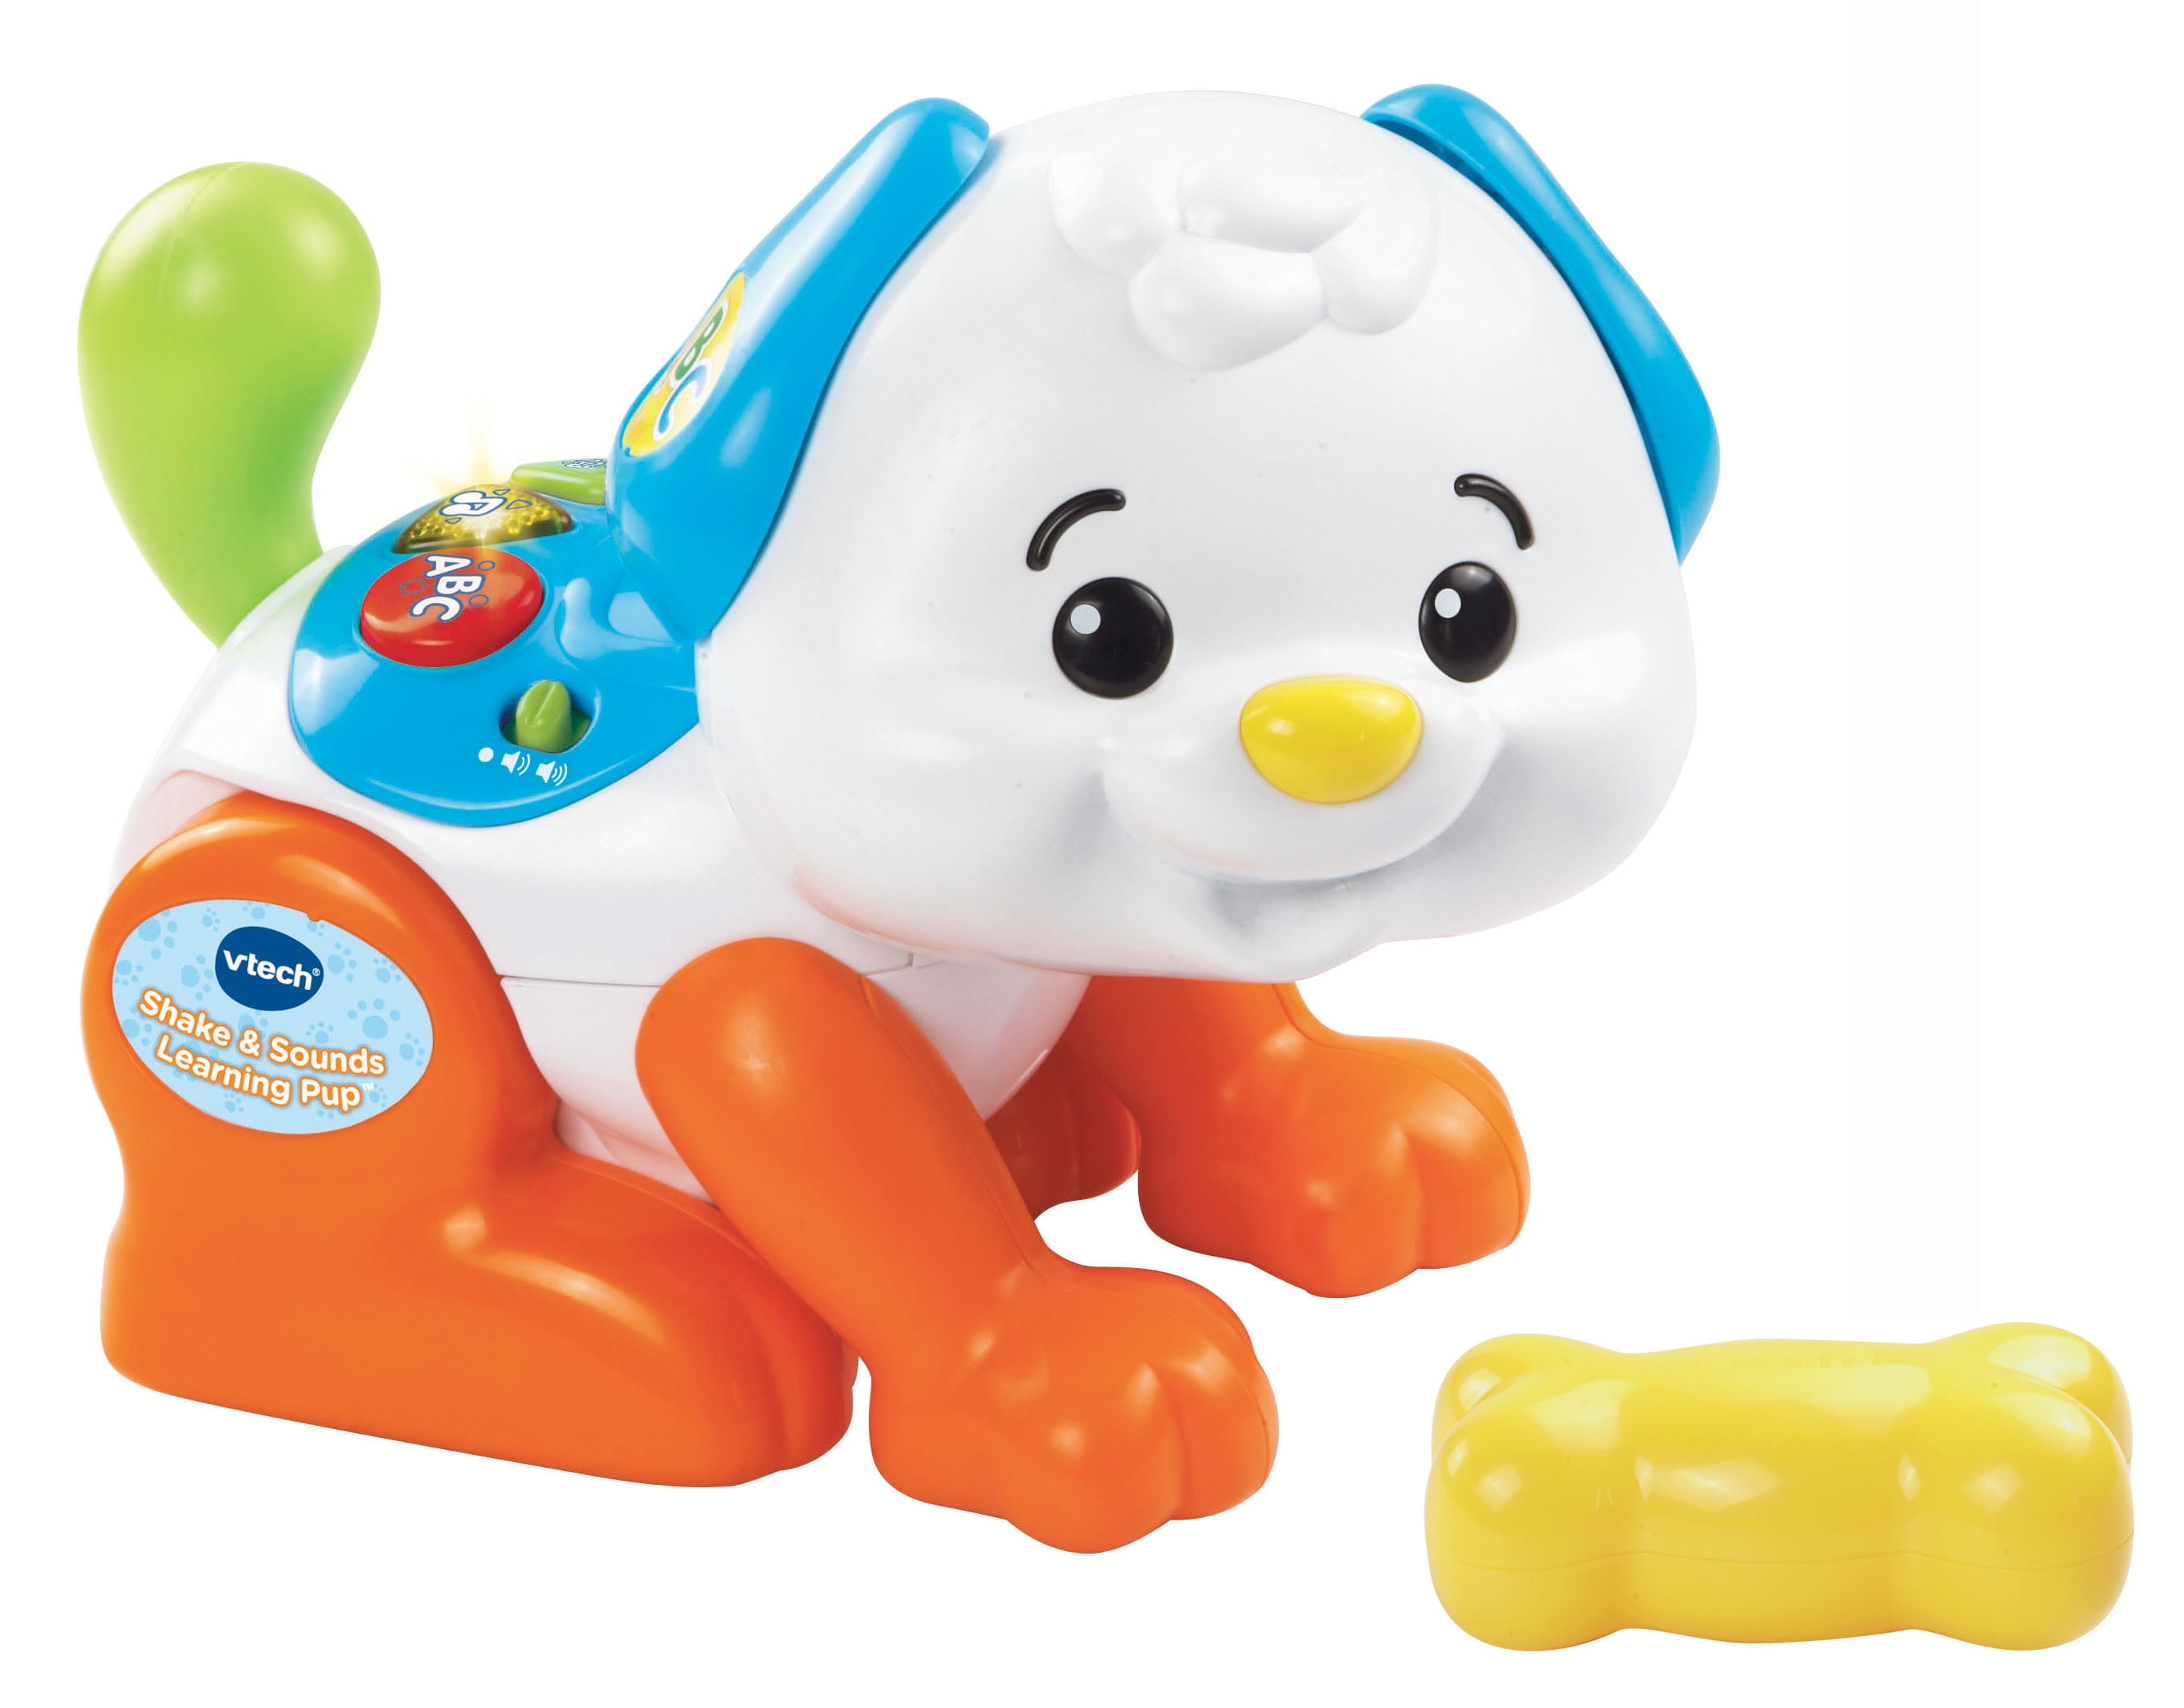 VTech Shake and Sounds Learning Pup 